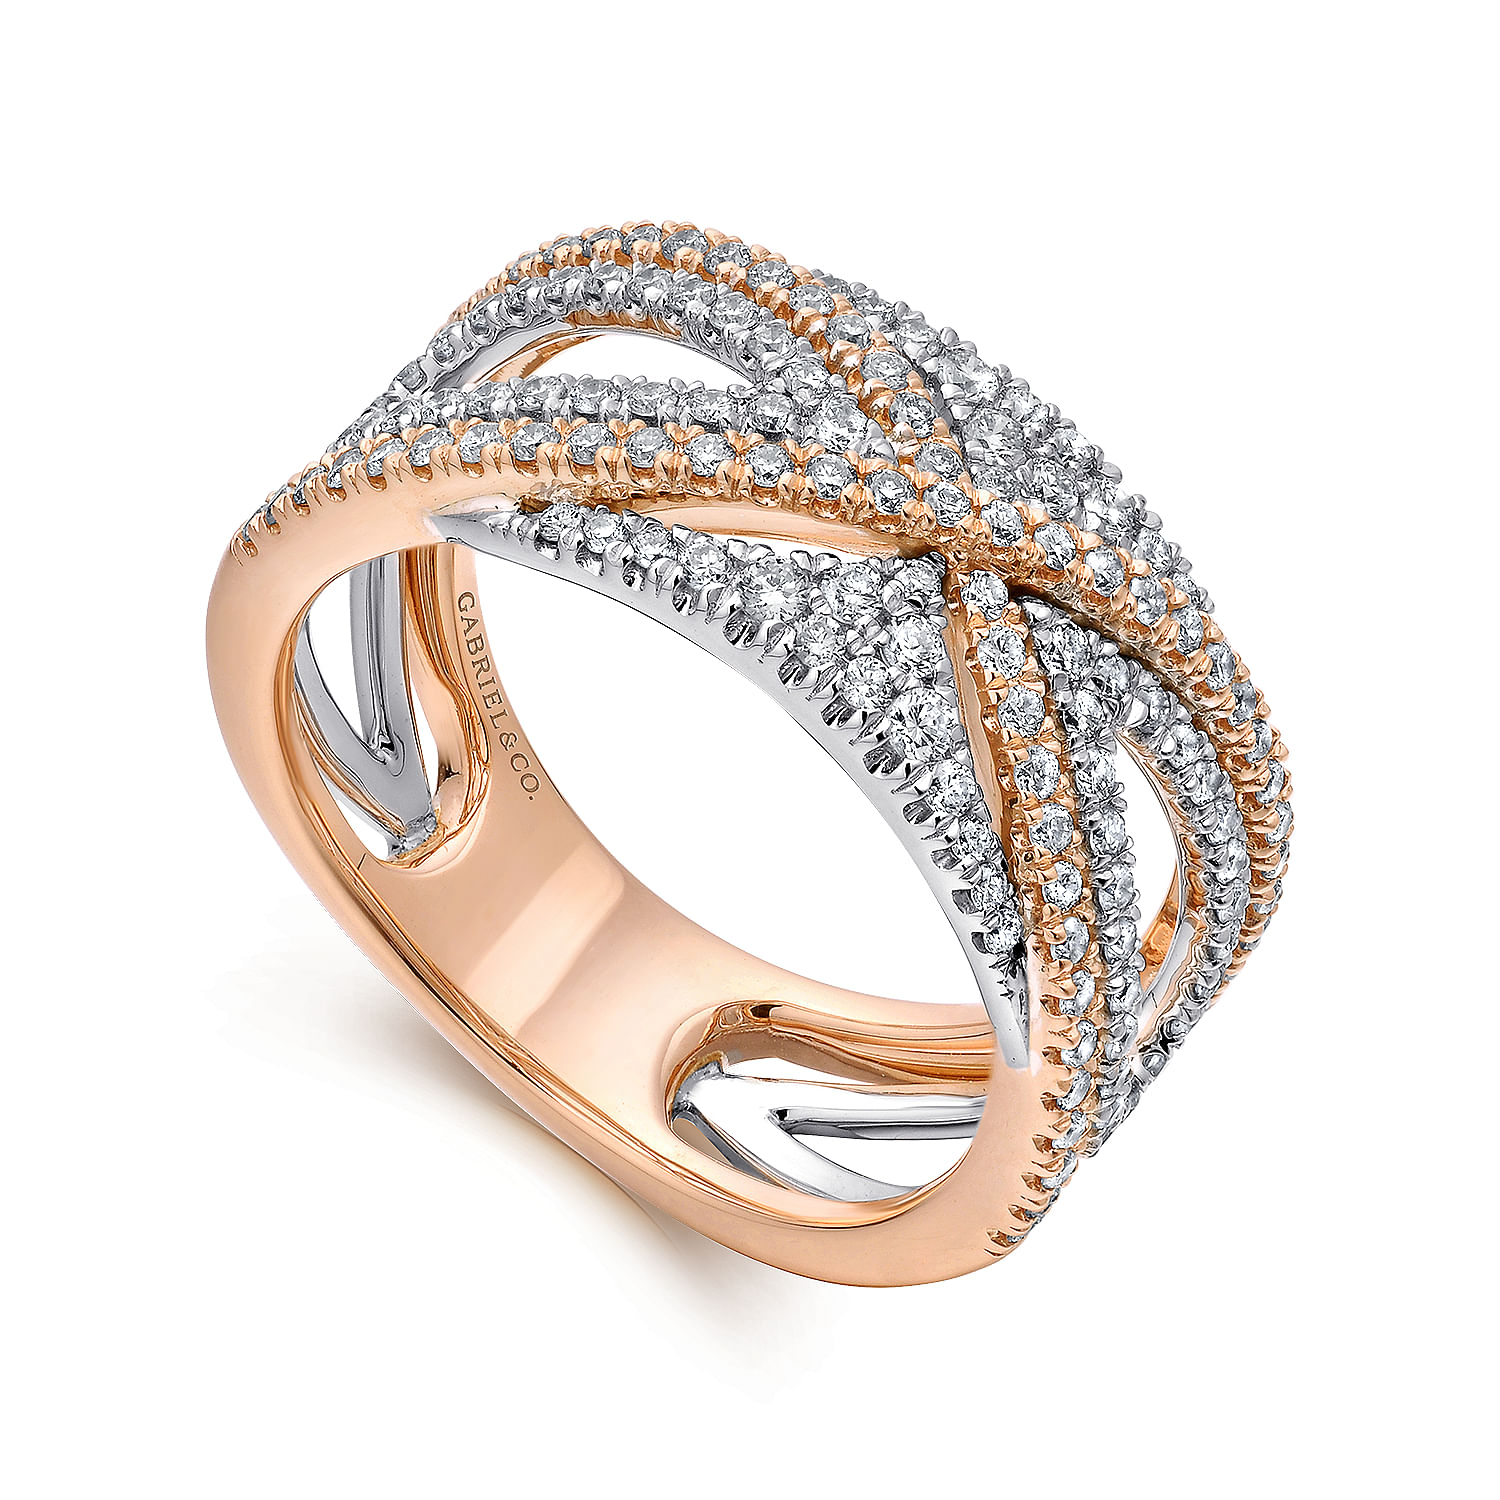 Wide 14K White and Rose Gold French Pave Set Diamond Anniversary Band - 0.67 ct - Shot 3